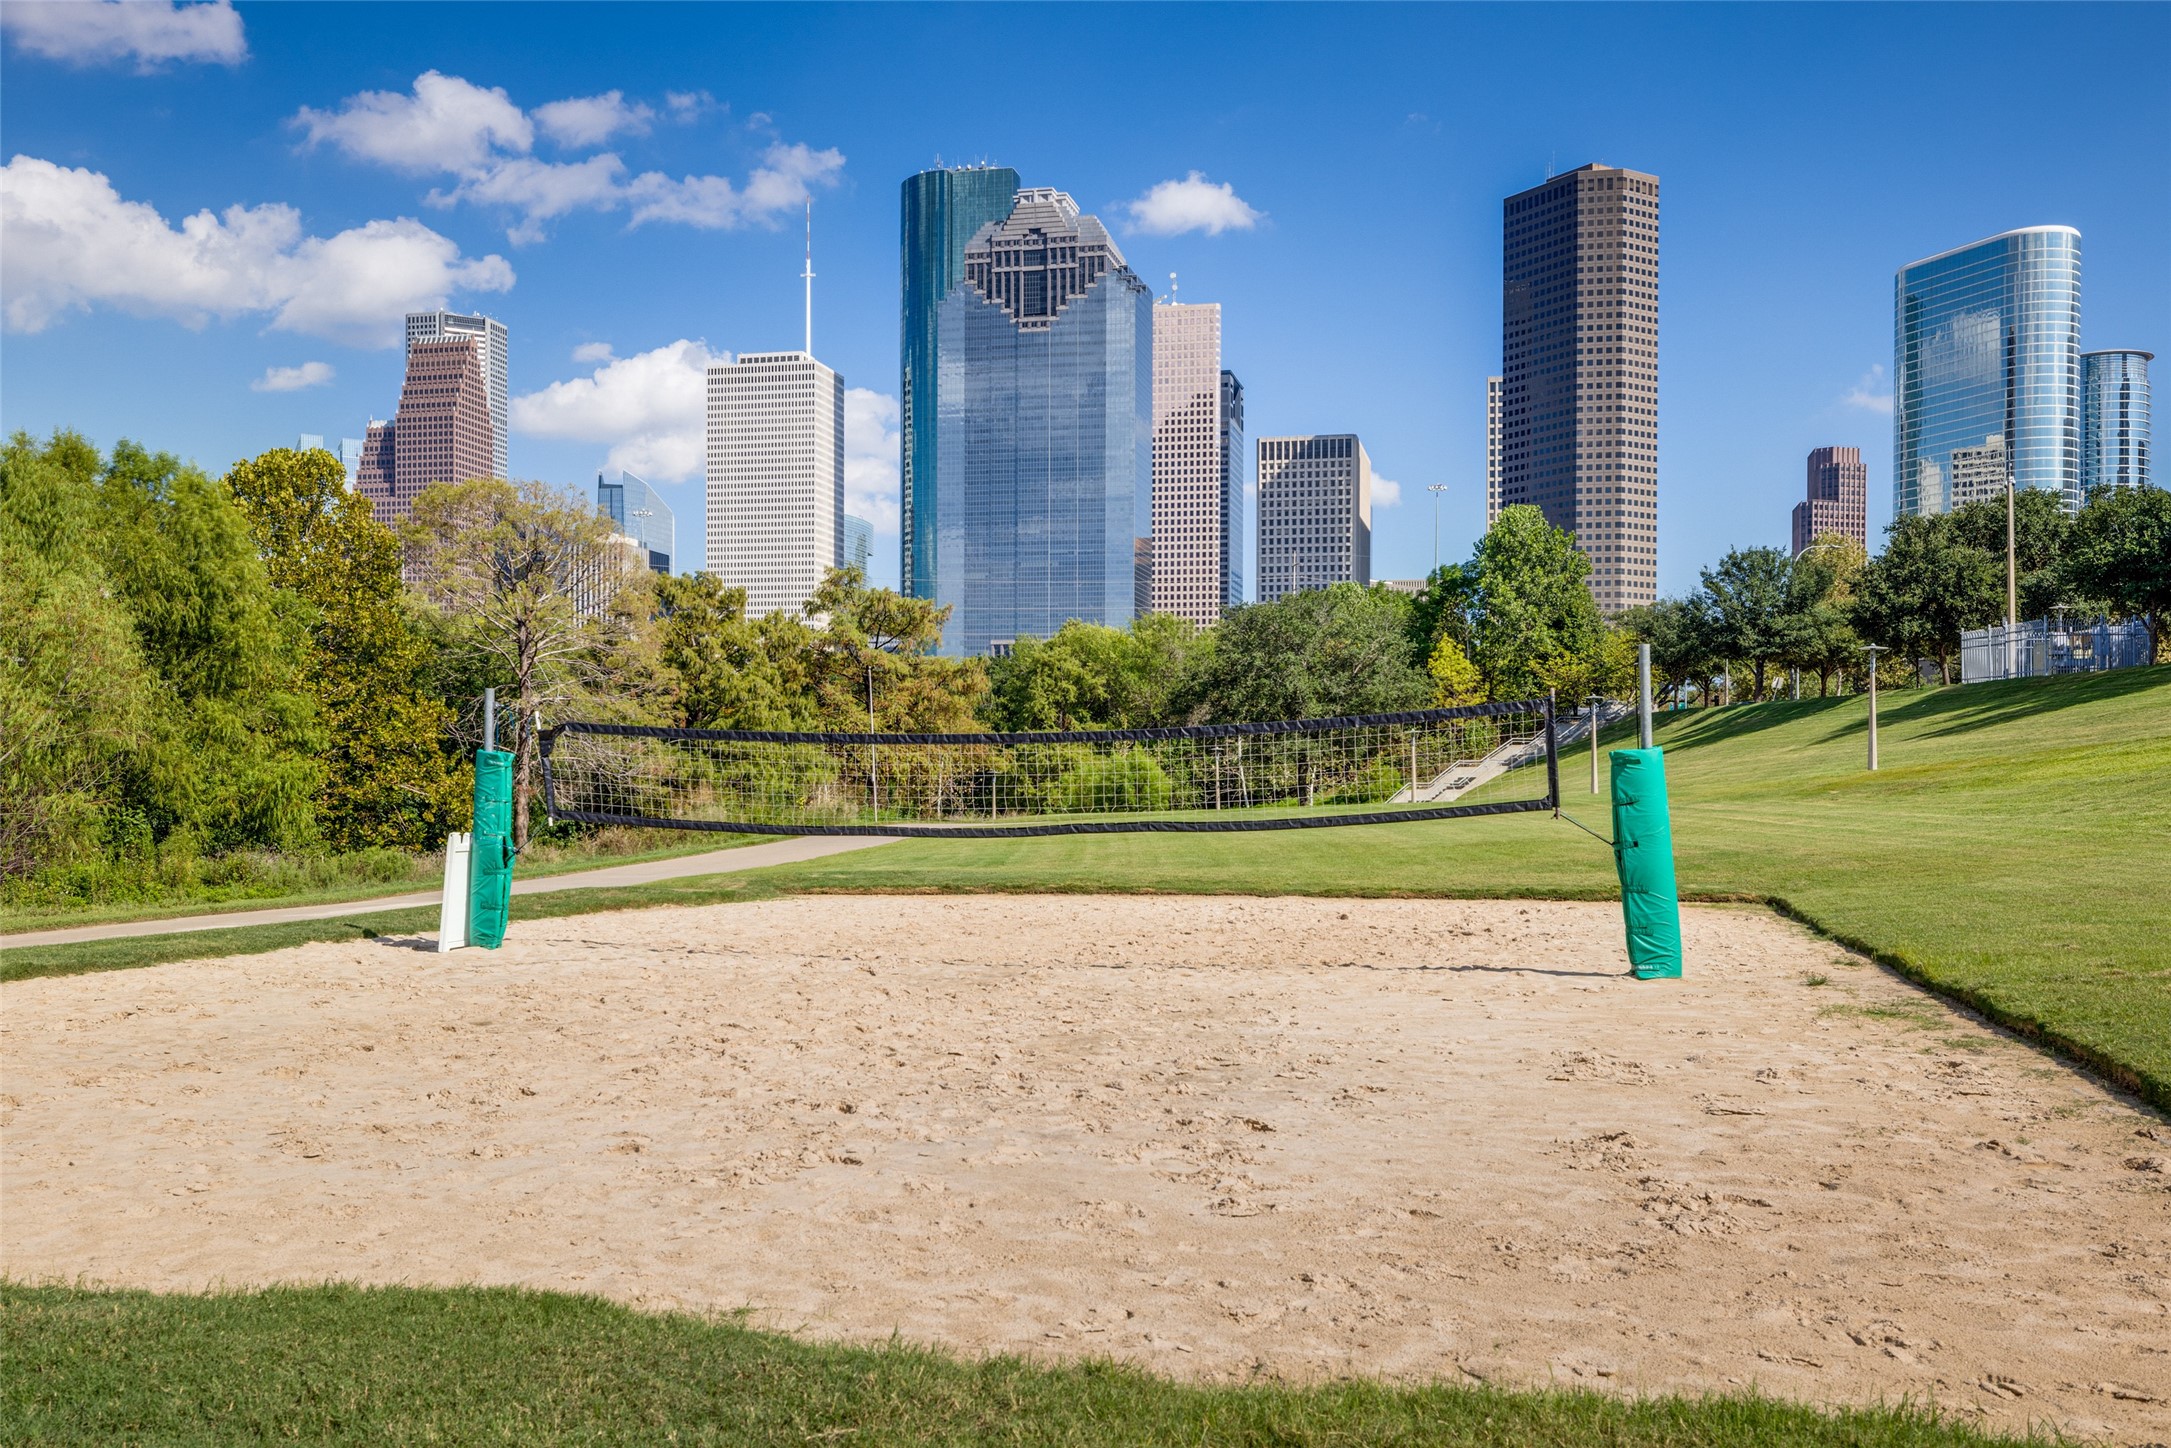 Buffalo Bayou Park is minutes away. Enjoy all the perks of being right outside of Downtown Houston. From the Skate park to the Cistern, Boat tours, Bike tours, Music events, volleyball, dog park, and Flora Restaurant; it all encompasses the 52-mile waterway!!